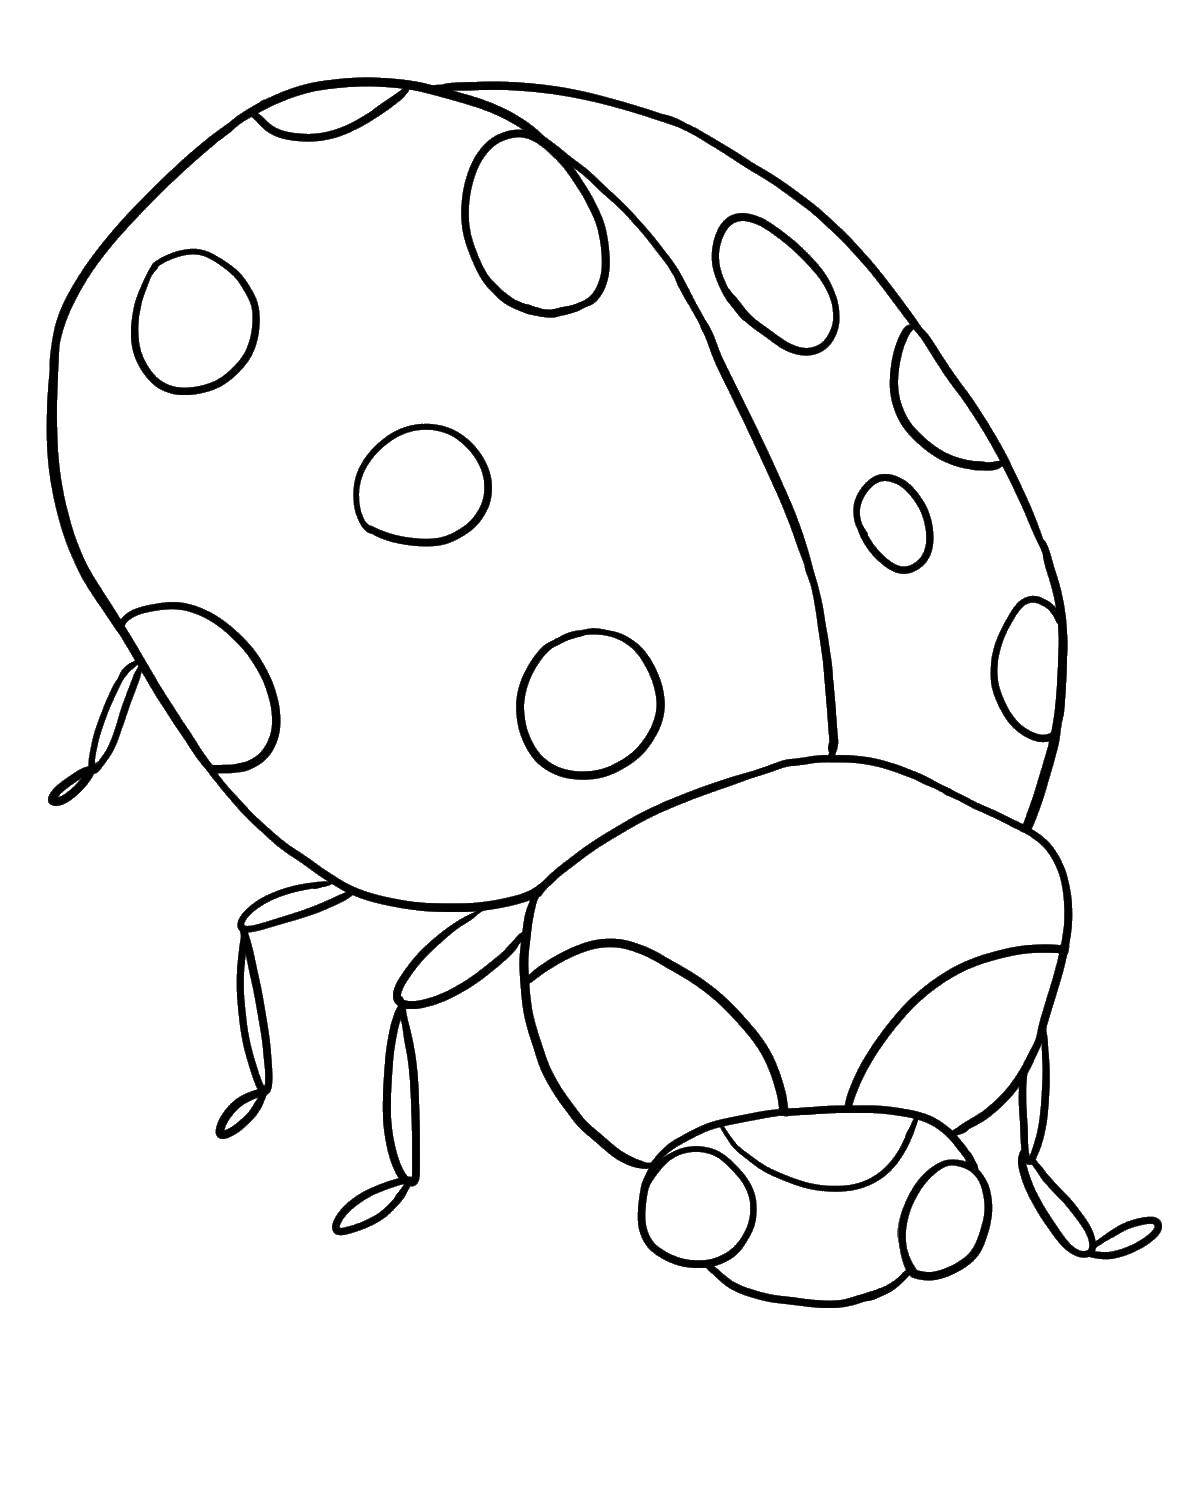 Coloring Ladybug.. Category Insects. Tags:  insect, ladybug.